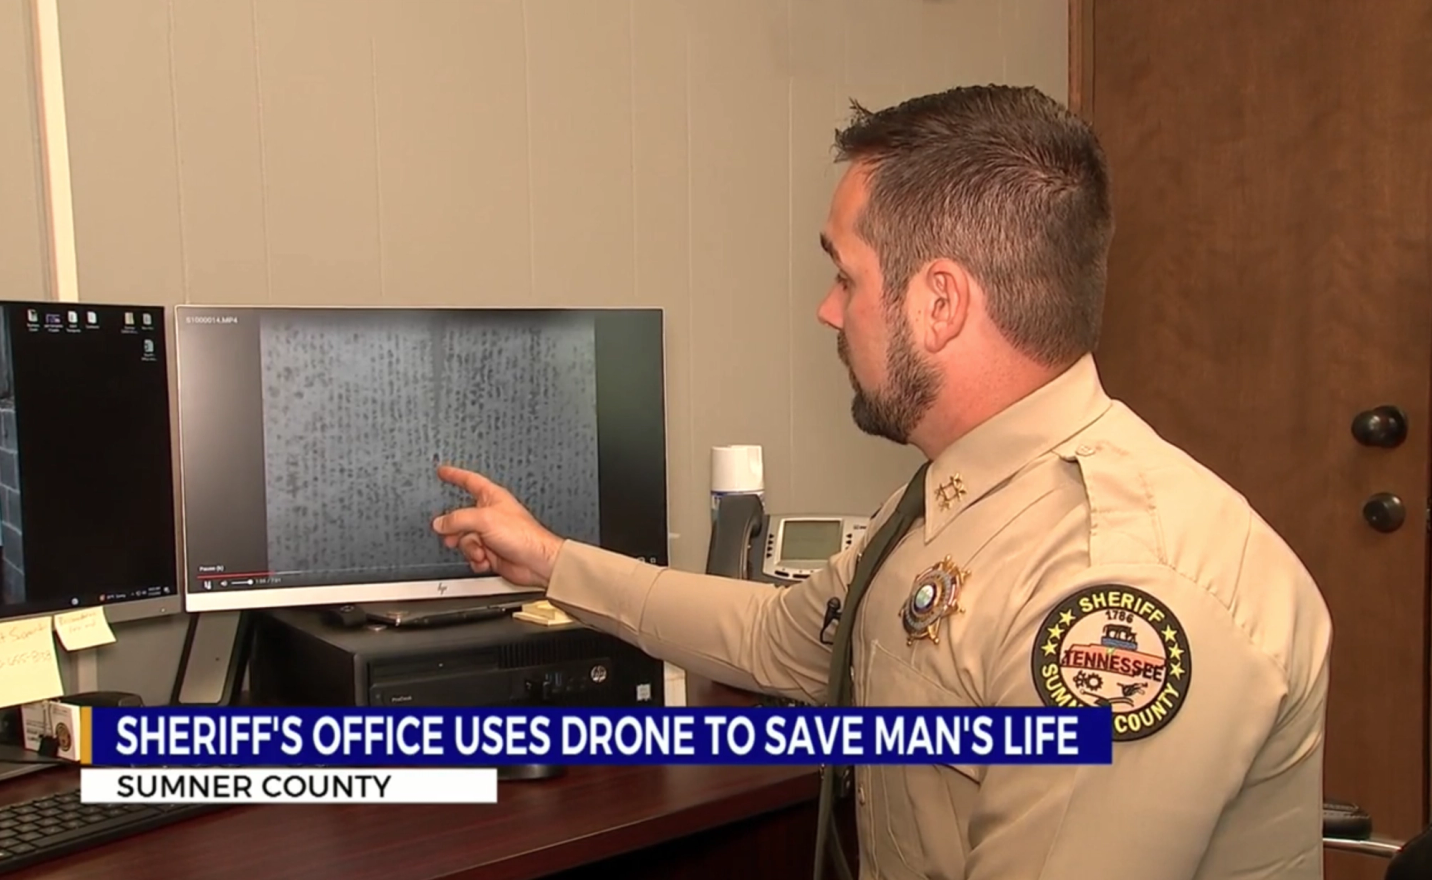 Sheriff's officer to the right of the frame pointing to one of two screens on a desk. The screen shows a video still taken from a Skydio drone.